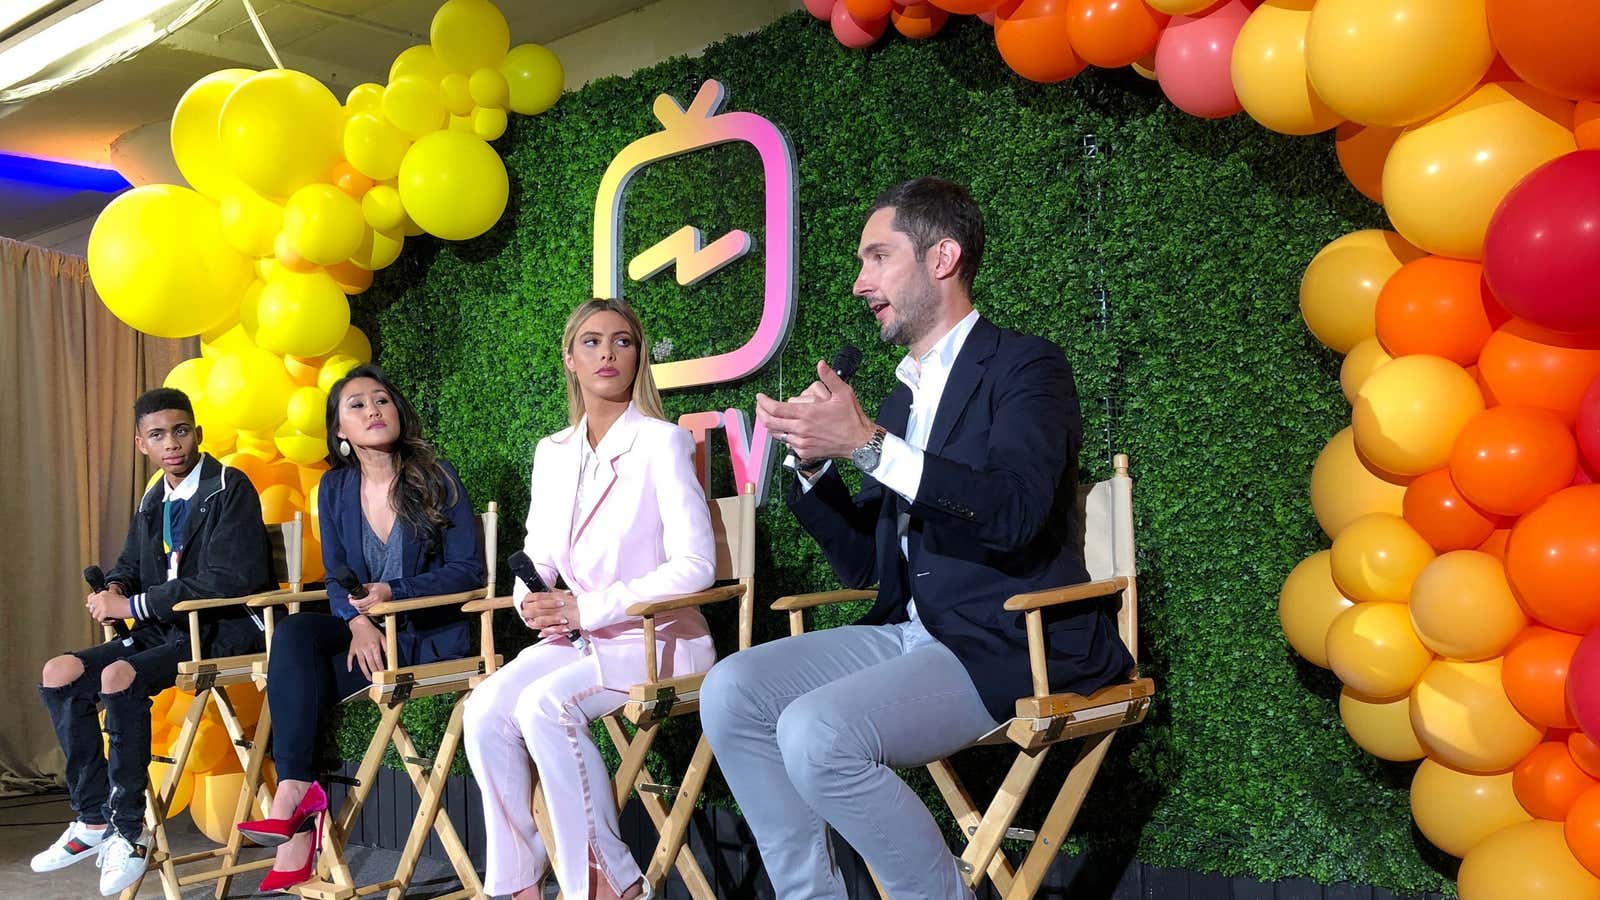 Instagram Chief Executive Kevin Systrom, right, answers a question at a news conference June 20, 2018.